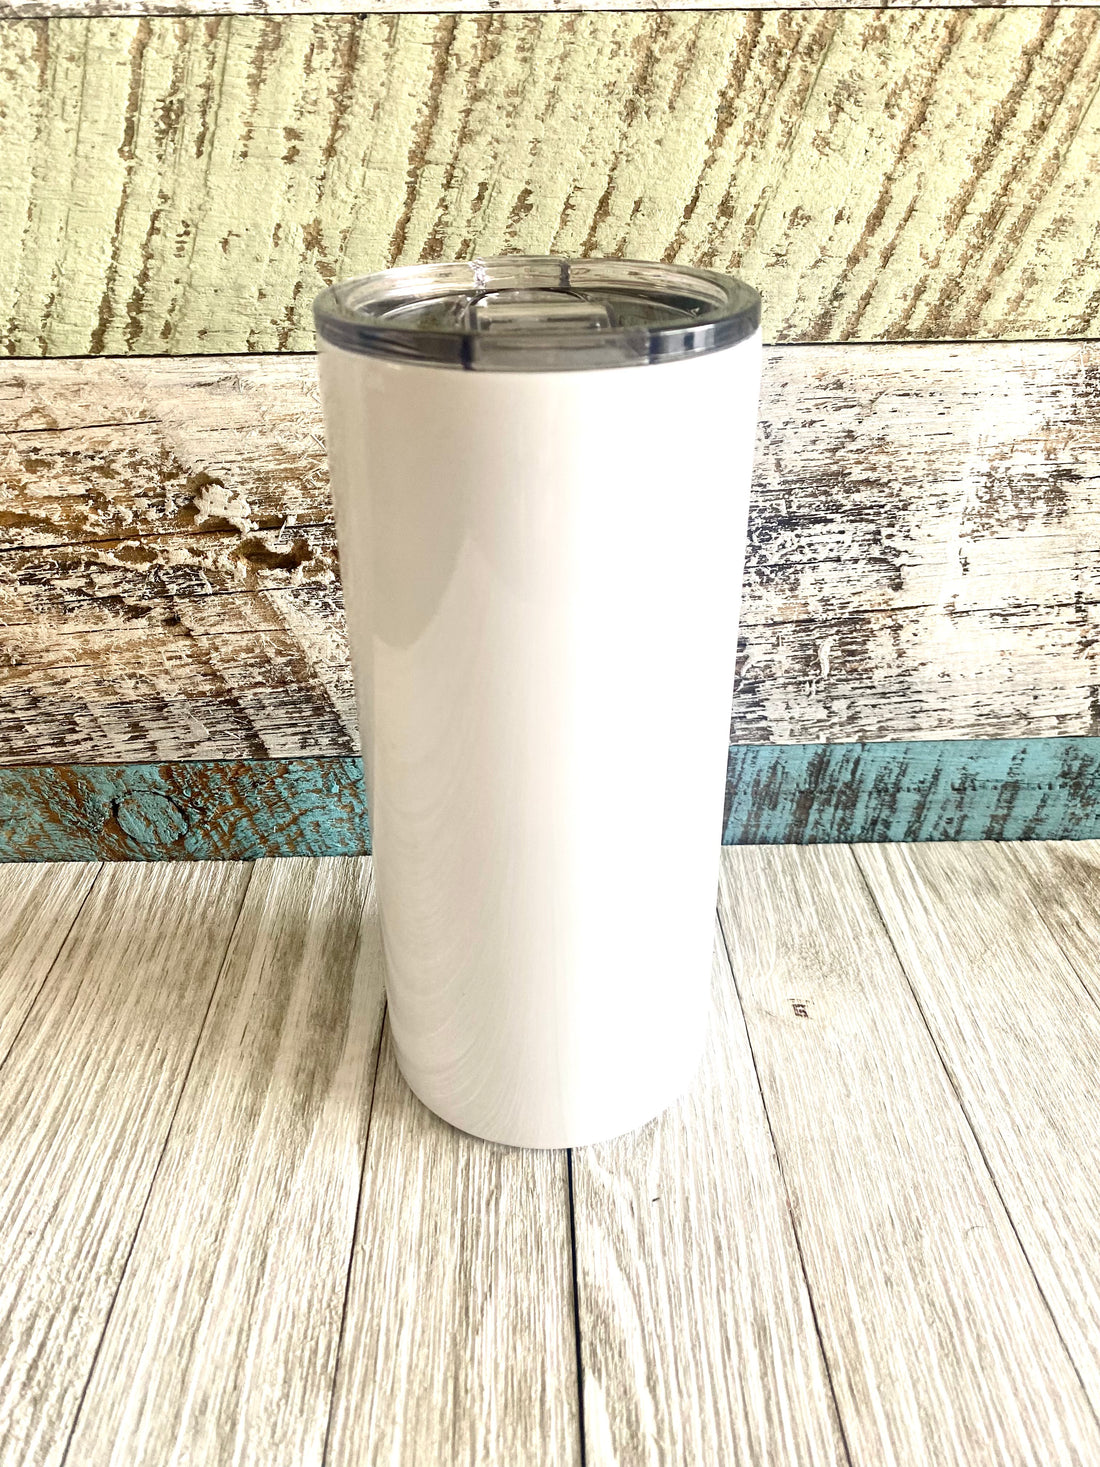 Sublimation Tumbler, White Tumbler, 22 oz Tumbler, Fatty Tumbler, Custom Drinkware, Personalized Tumbler, Sublimation Printing, Heat Transfer Tumbler, Double-Walled Tumbler, Insulated Drinkware, Beverage Container, Durable Tumbler, Stainless Steel Tumbler,